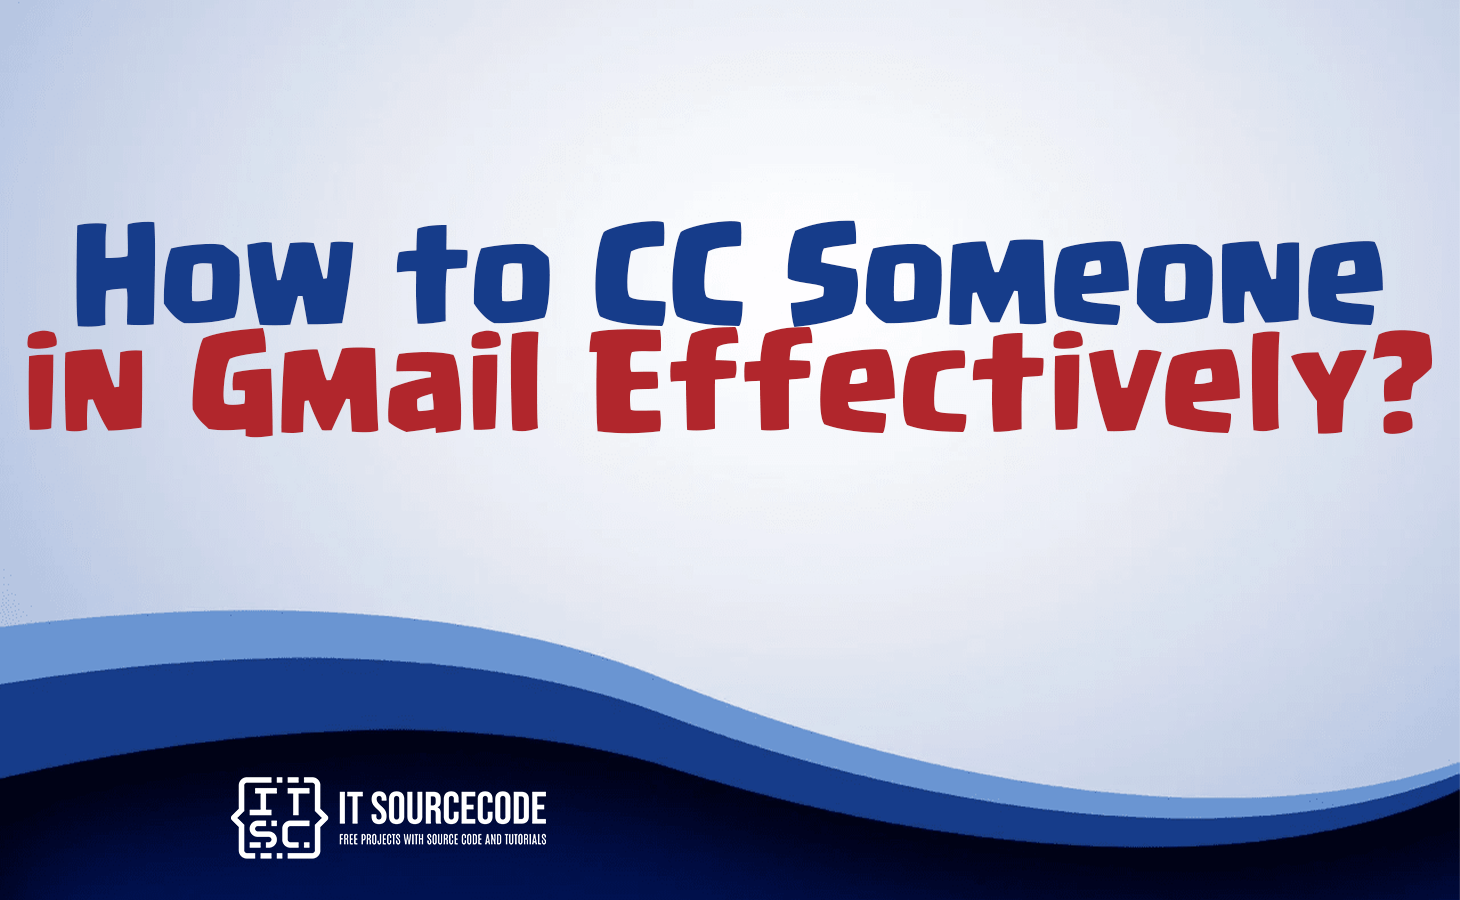 how to cc someone in gmail